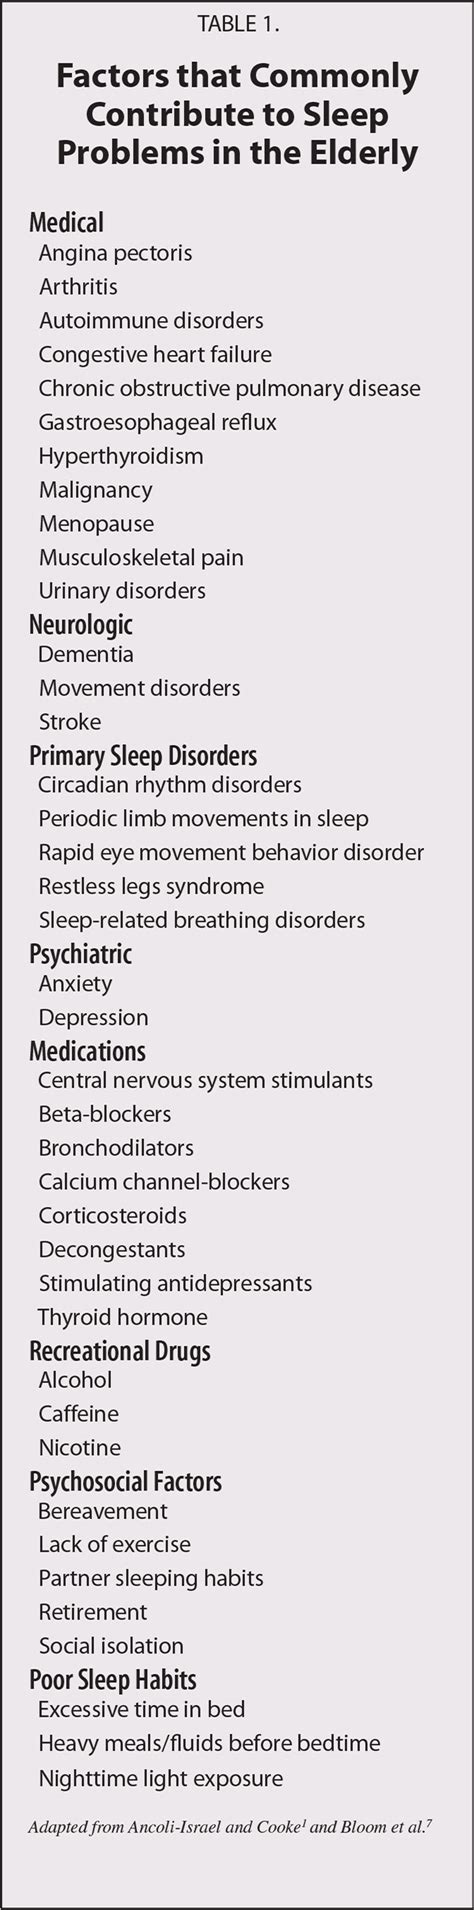 The Use Of Hypnotics To Treat Sleep Problems In The Elderly